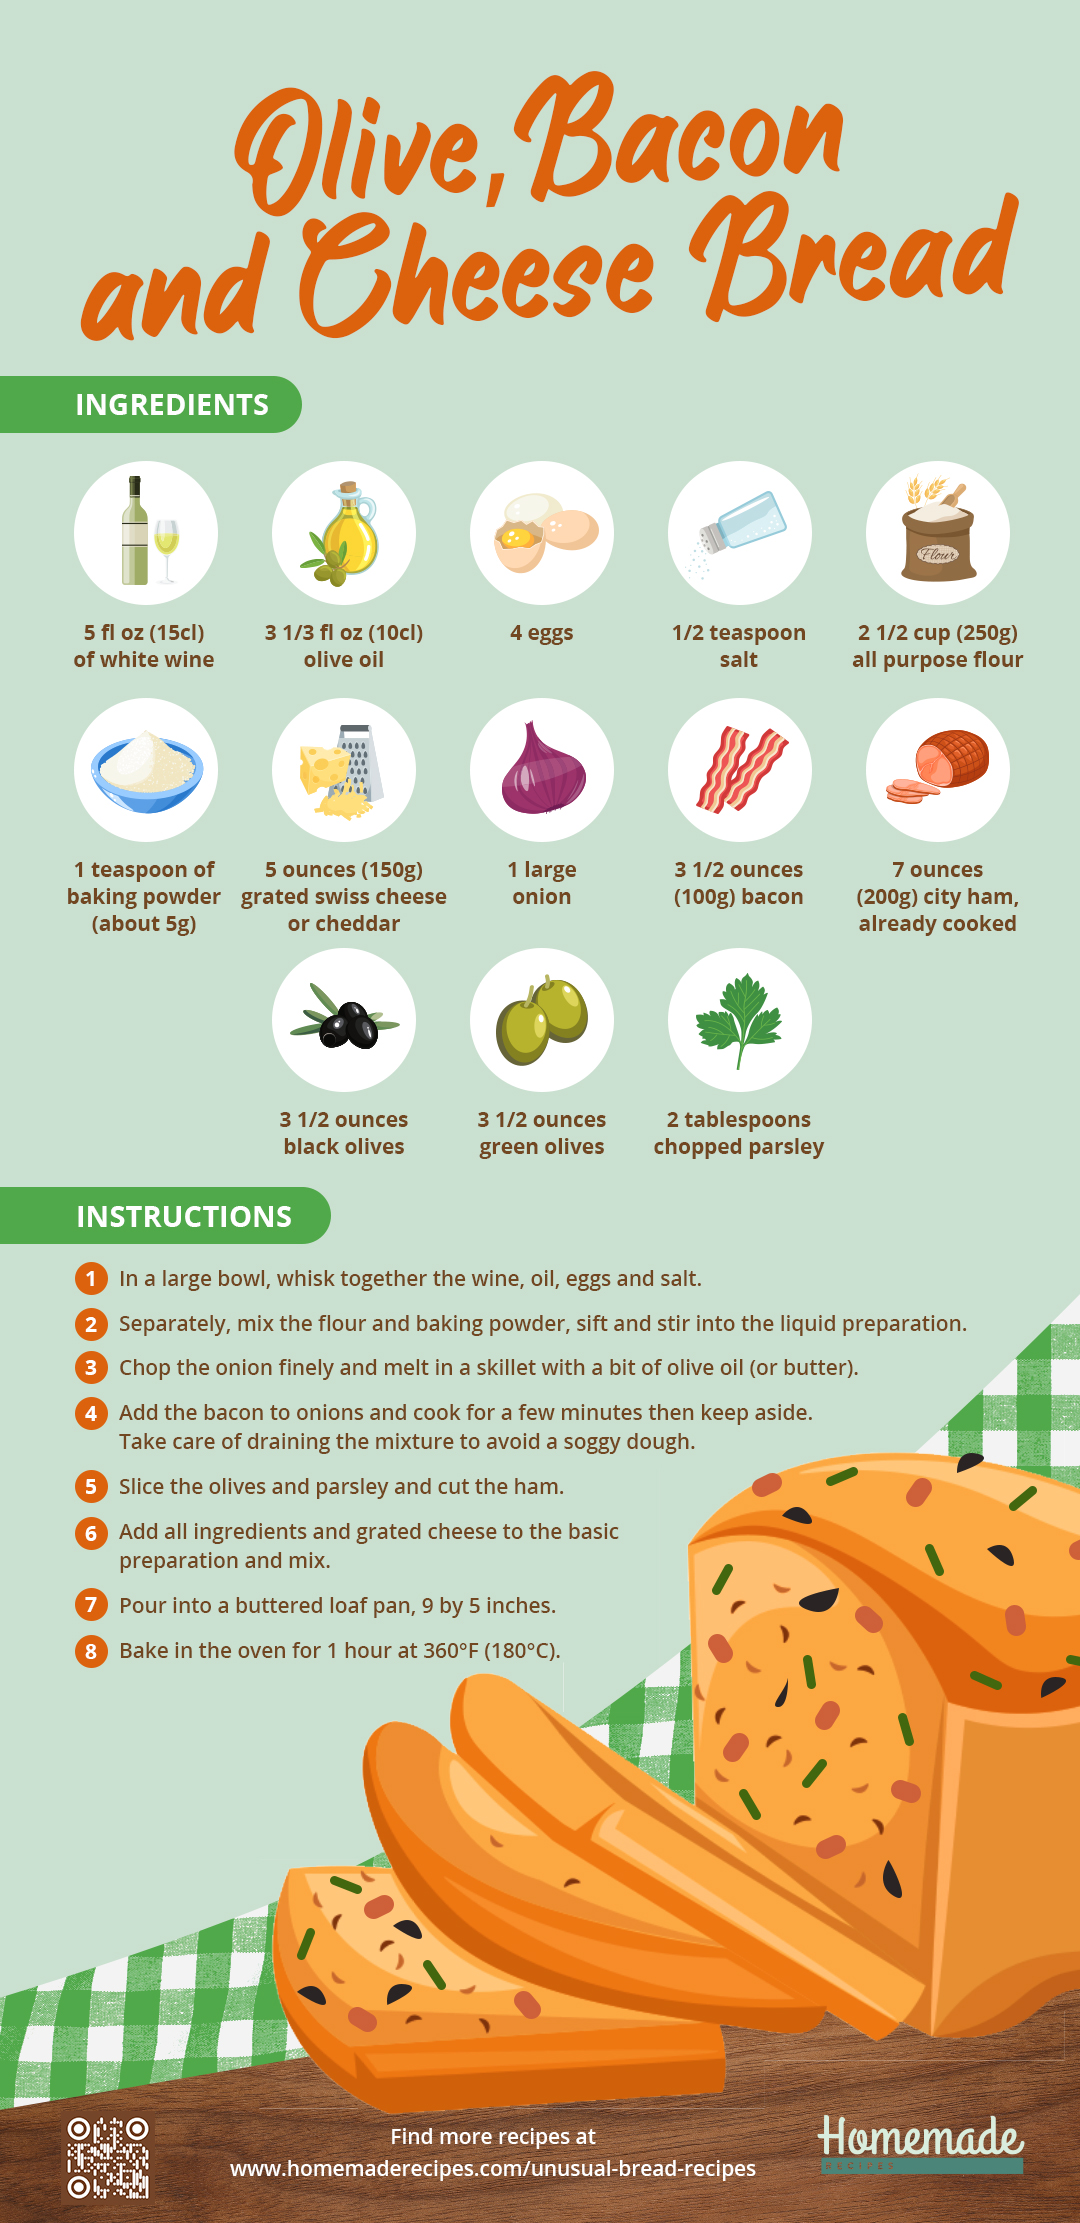 Olive, Bacon and Cheese Bread | Unusual Bread Recipes You Have To Try [INFOGRAPHIC]